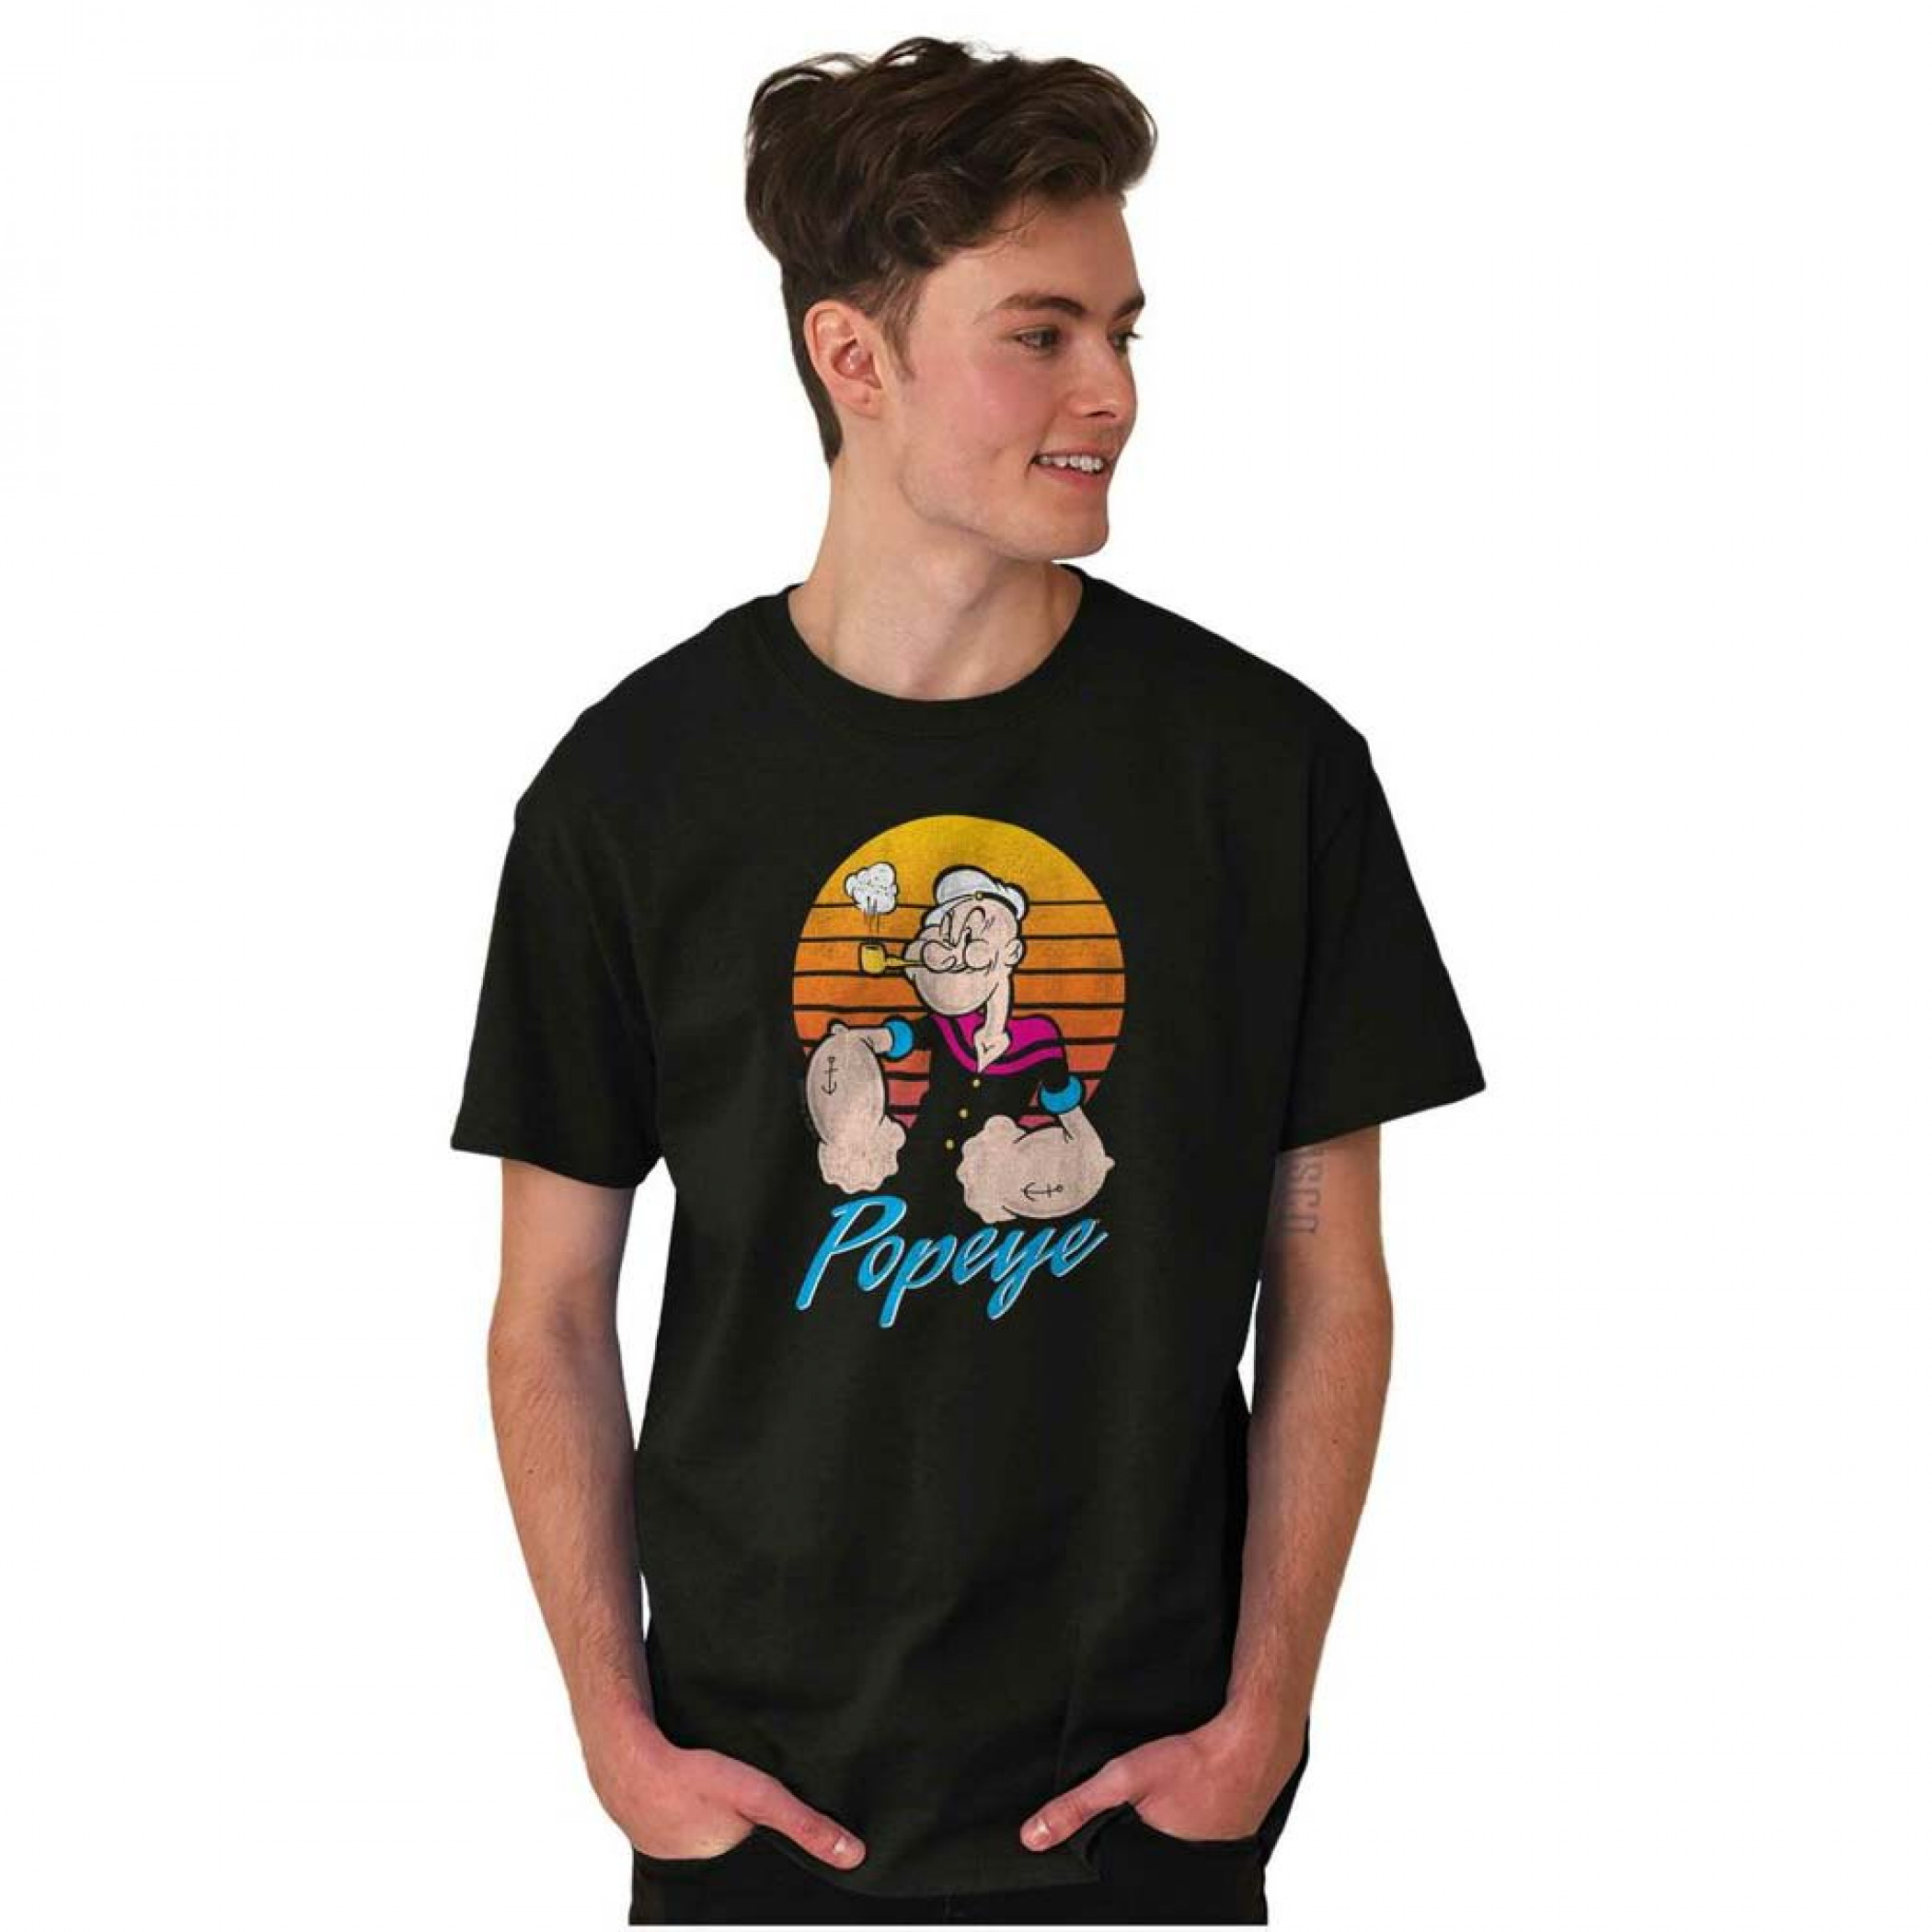 Popeye The Sailor Man Character 80's Retro Style T-Shirt